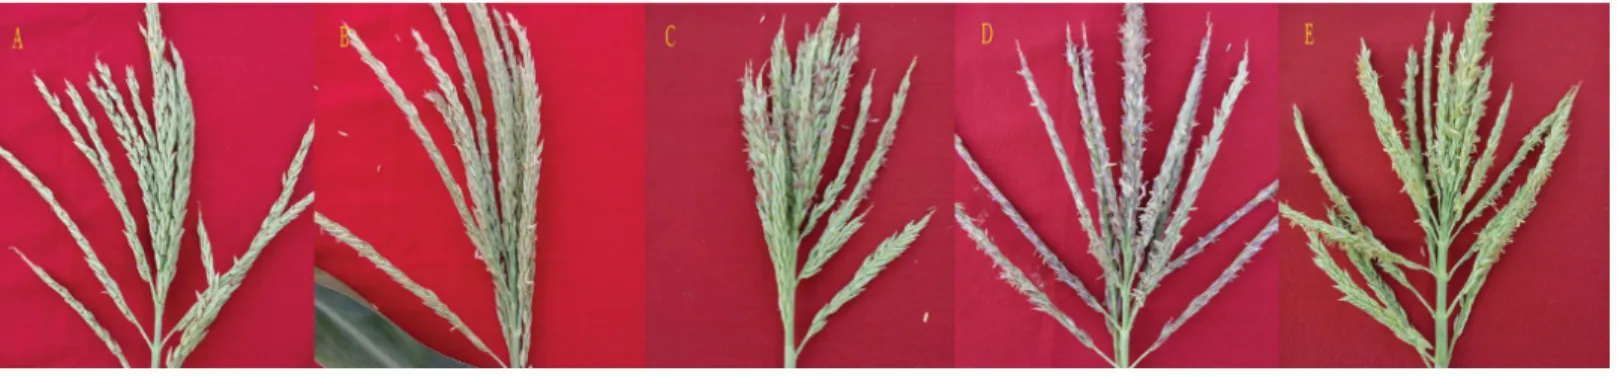 Figure 1 Different male fertility grades of maize anthers. A–E indicated plant fertility grades I–V respectively